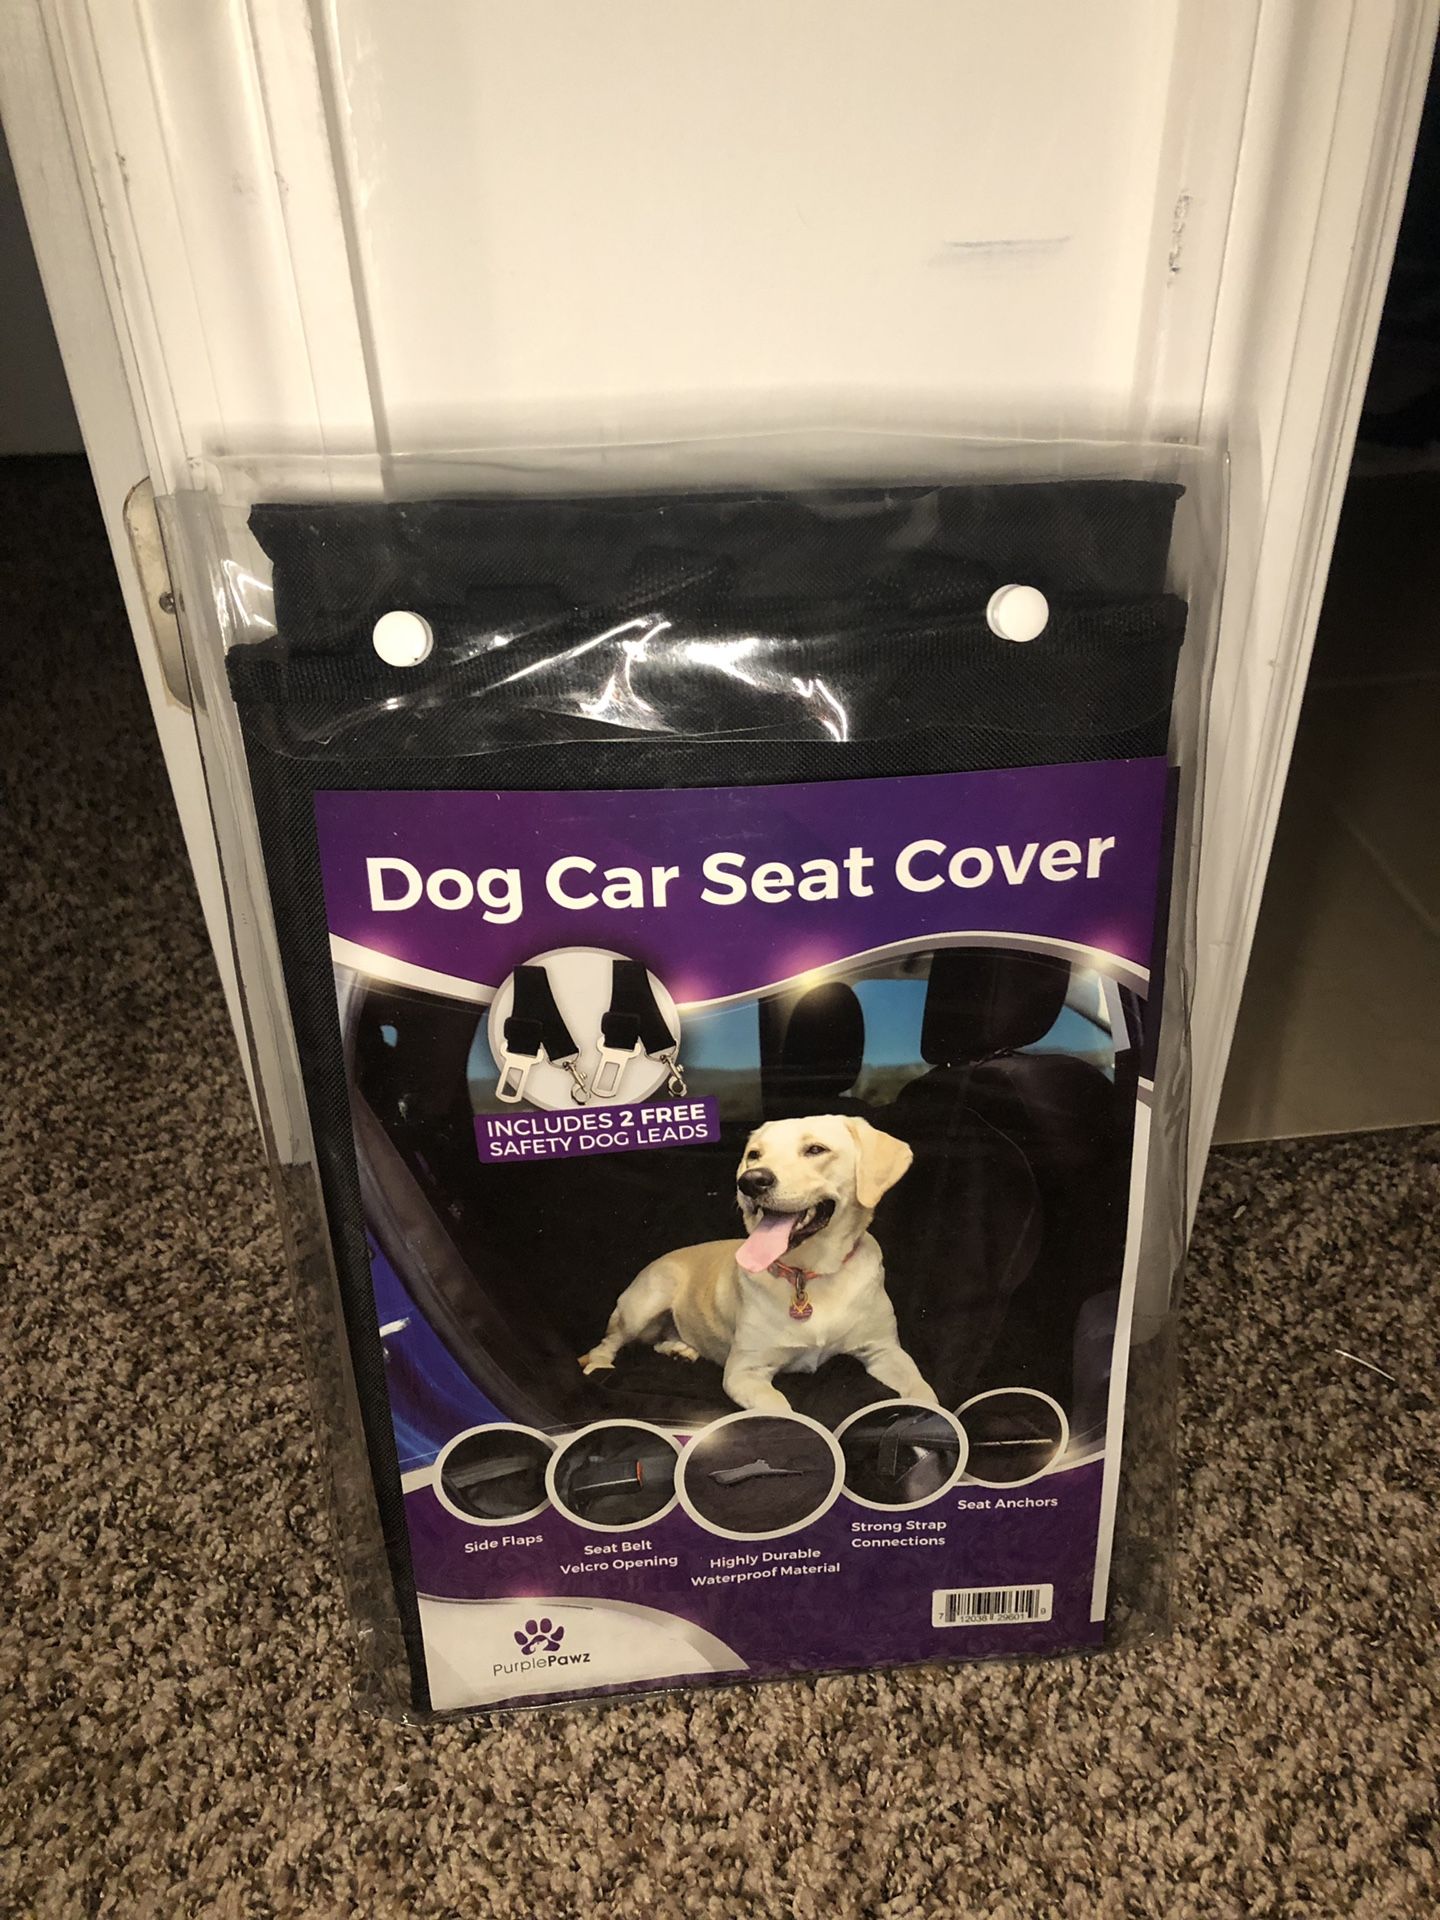 New dog car seat cover